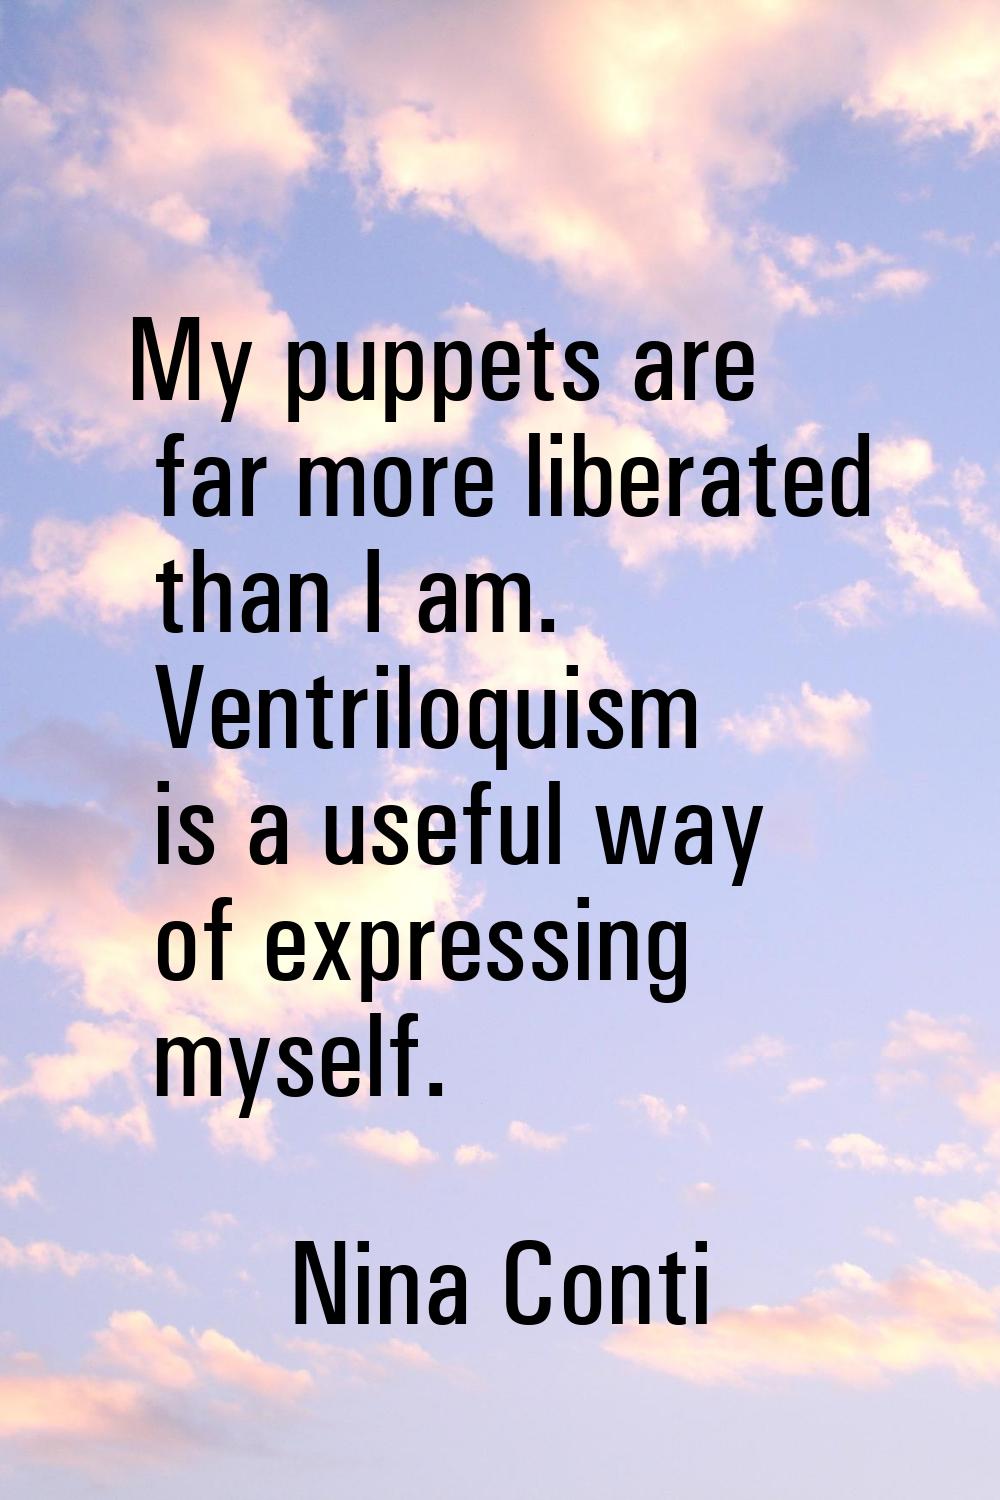 My puppets are far more liberated than I am. Ventriloquism is a useful way of expressing myself.